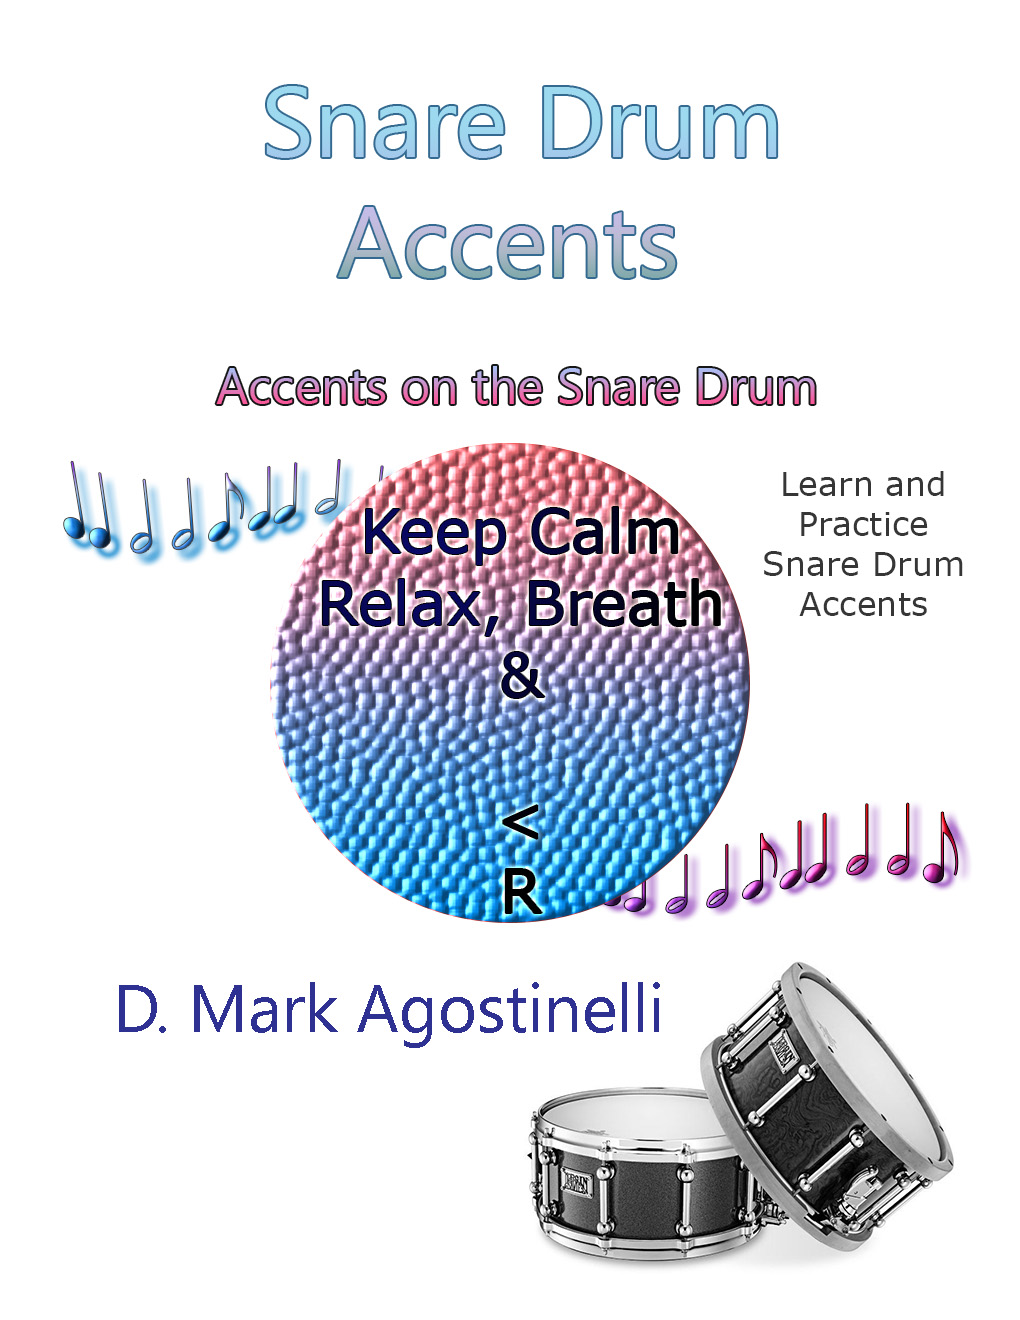 Snare Drum Accents - D Mark Agostinelli